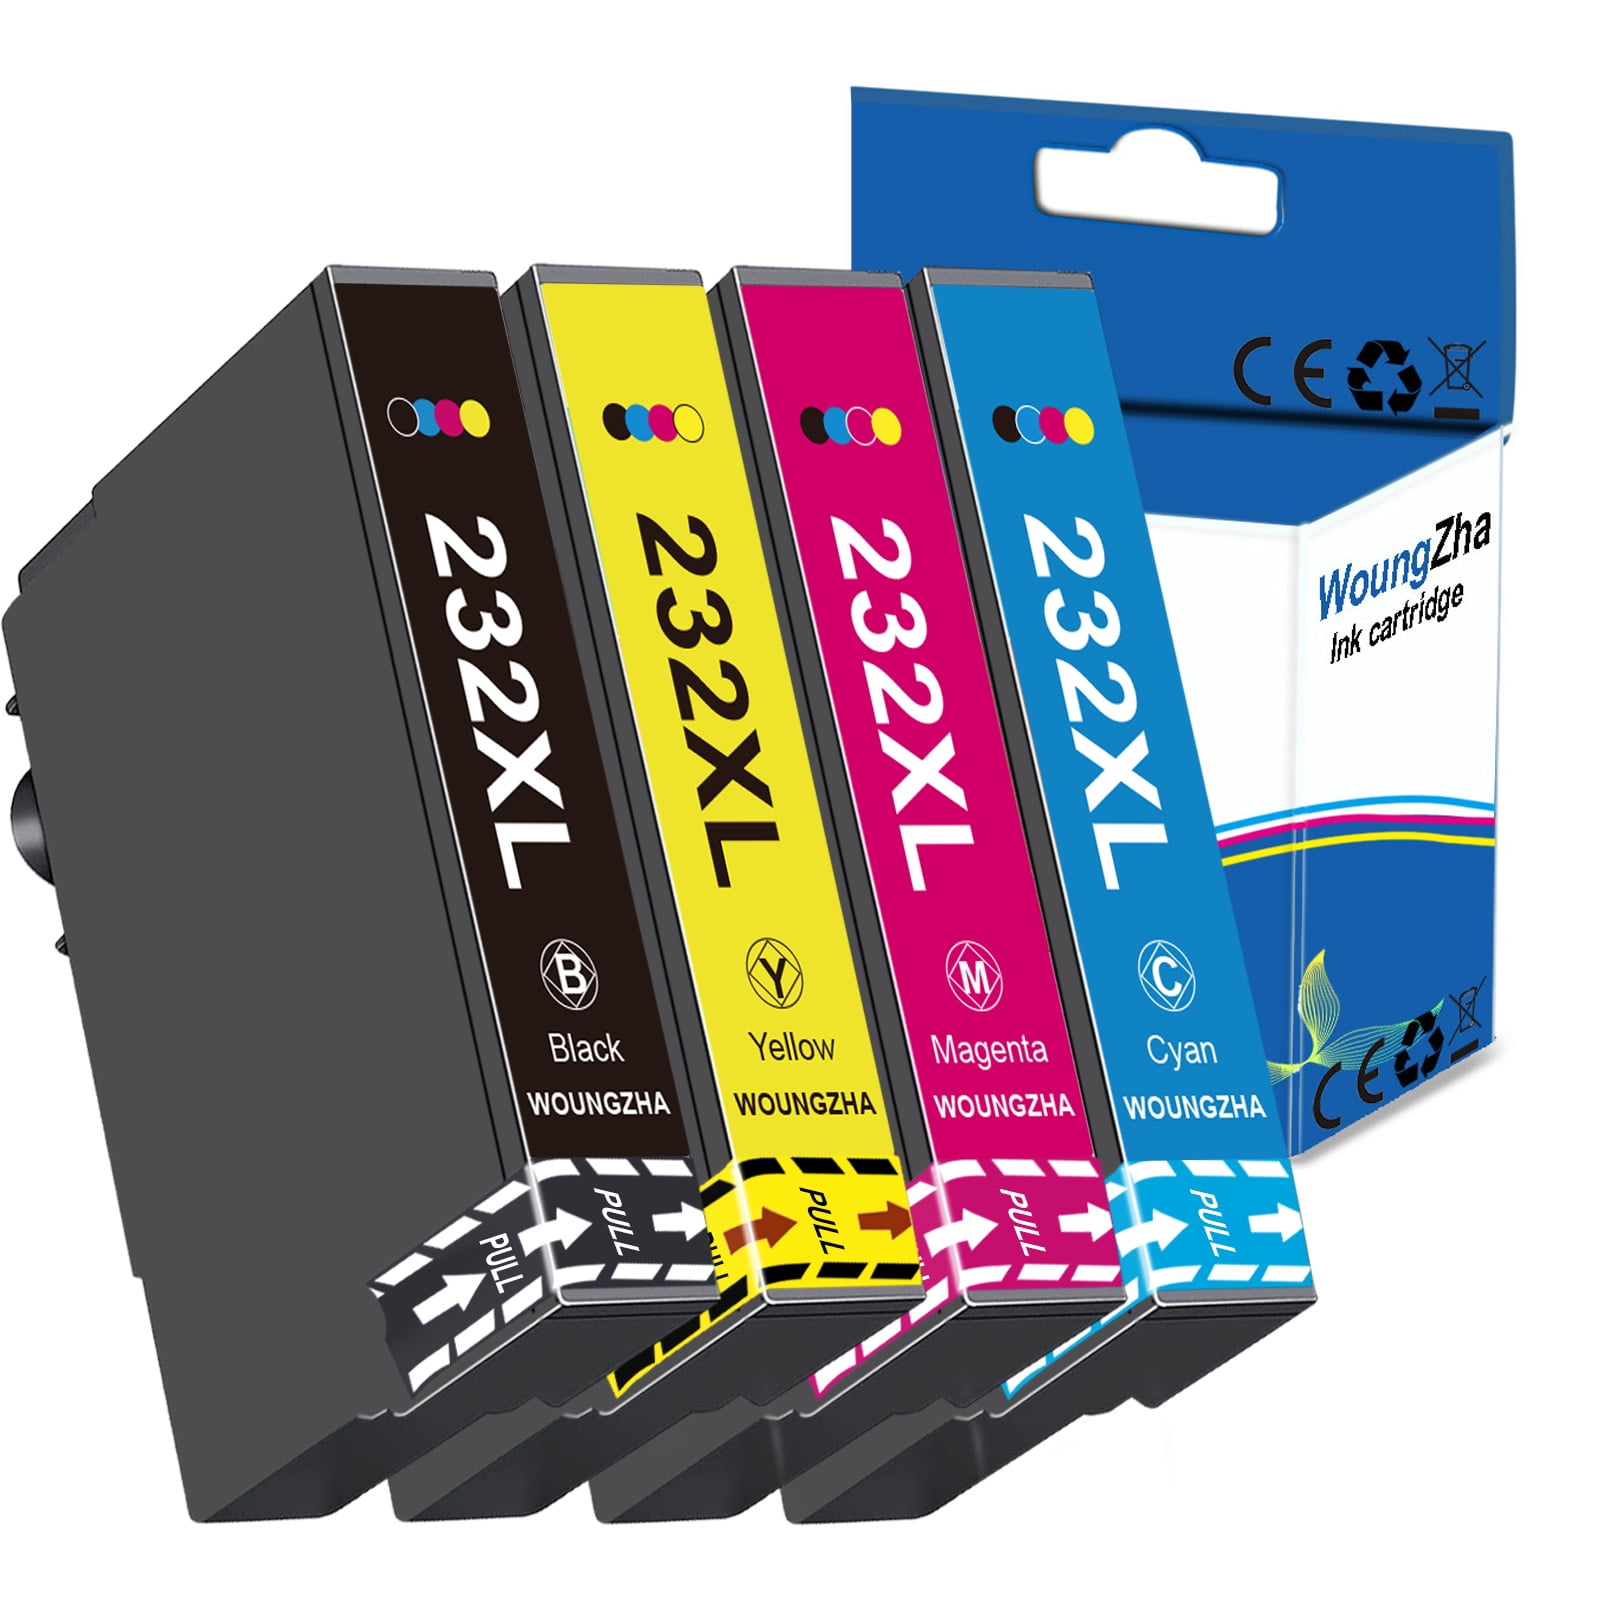 232 232XL Refill Ink Cartridge For Epson Expression Home XP 4200 4205 WF  2950 2930 Printer No Chip - AliExpress